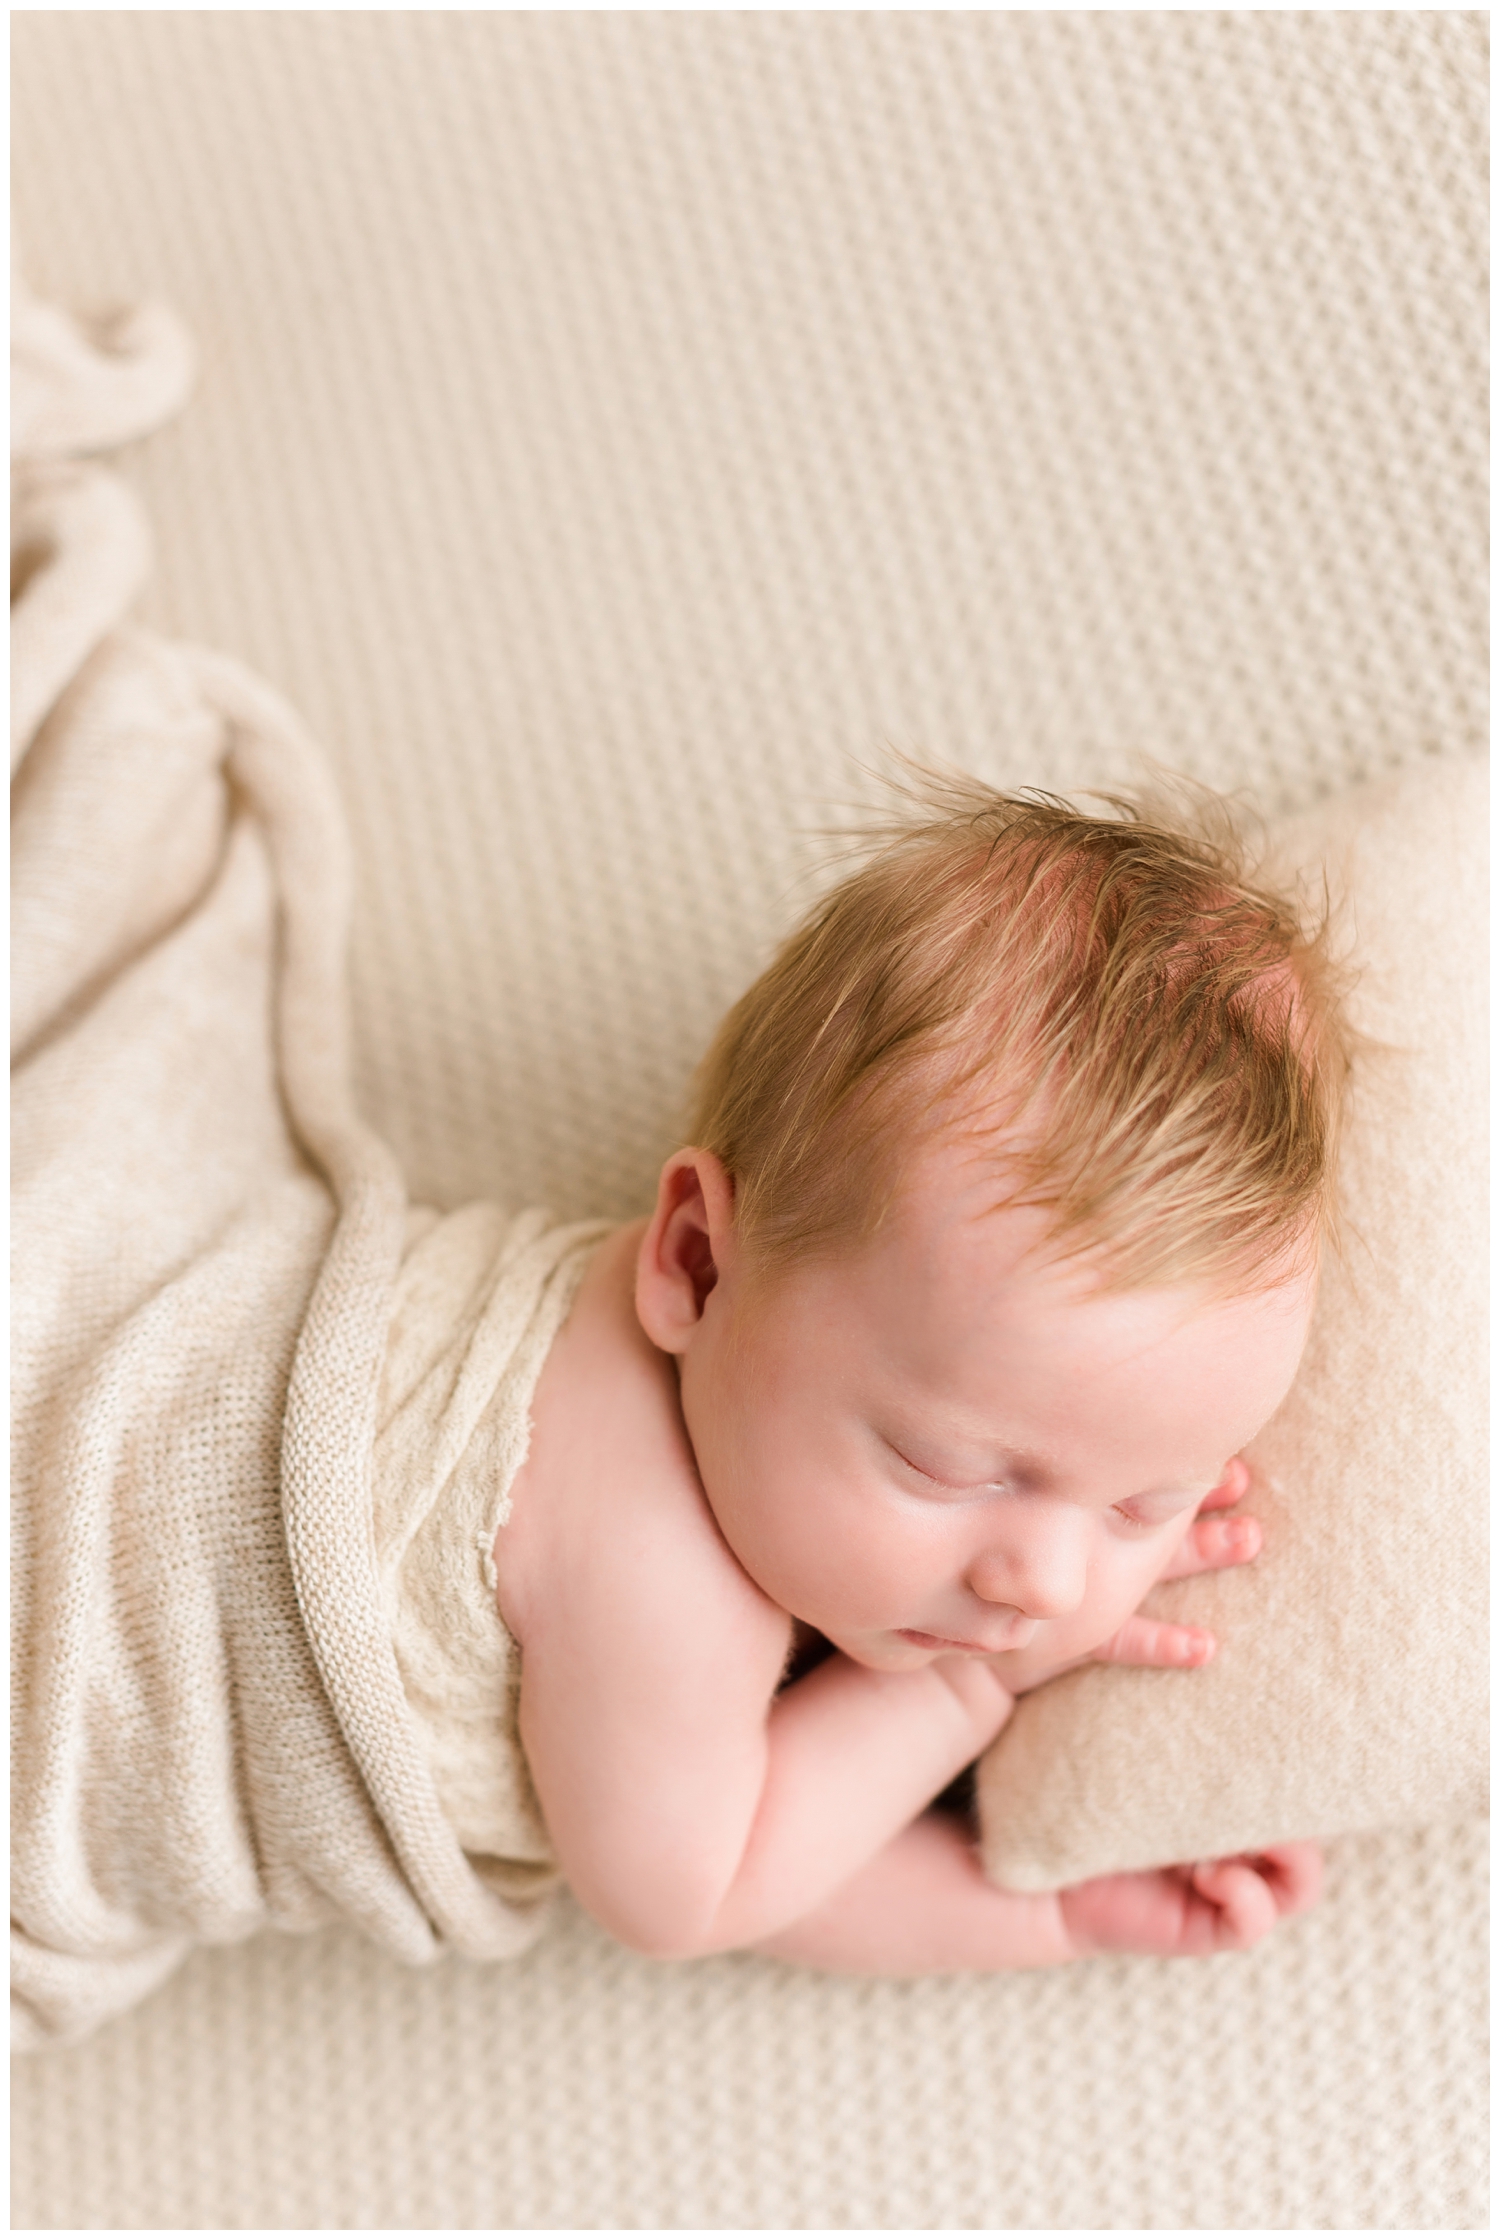 Newborn baby Brody sleeping soundly on a neutral pillow and blanket | CB Studio